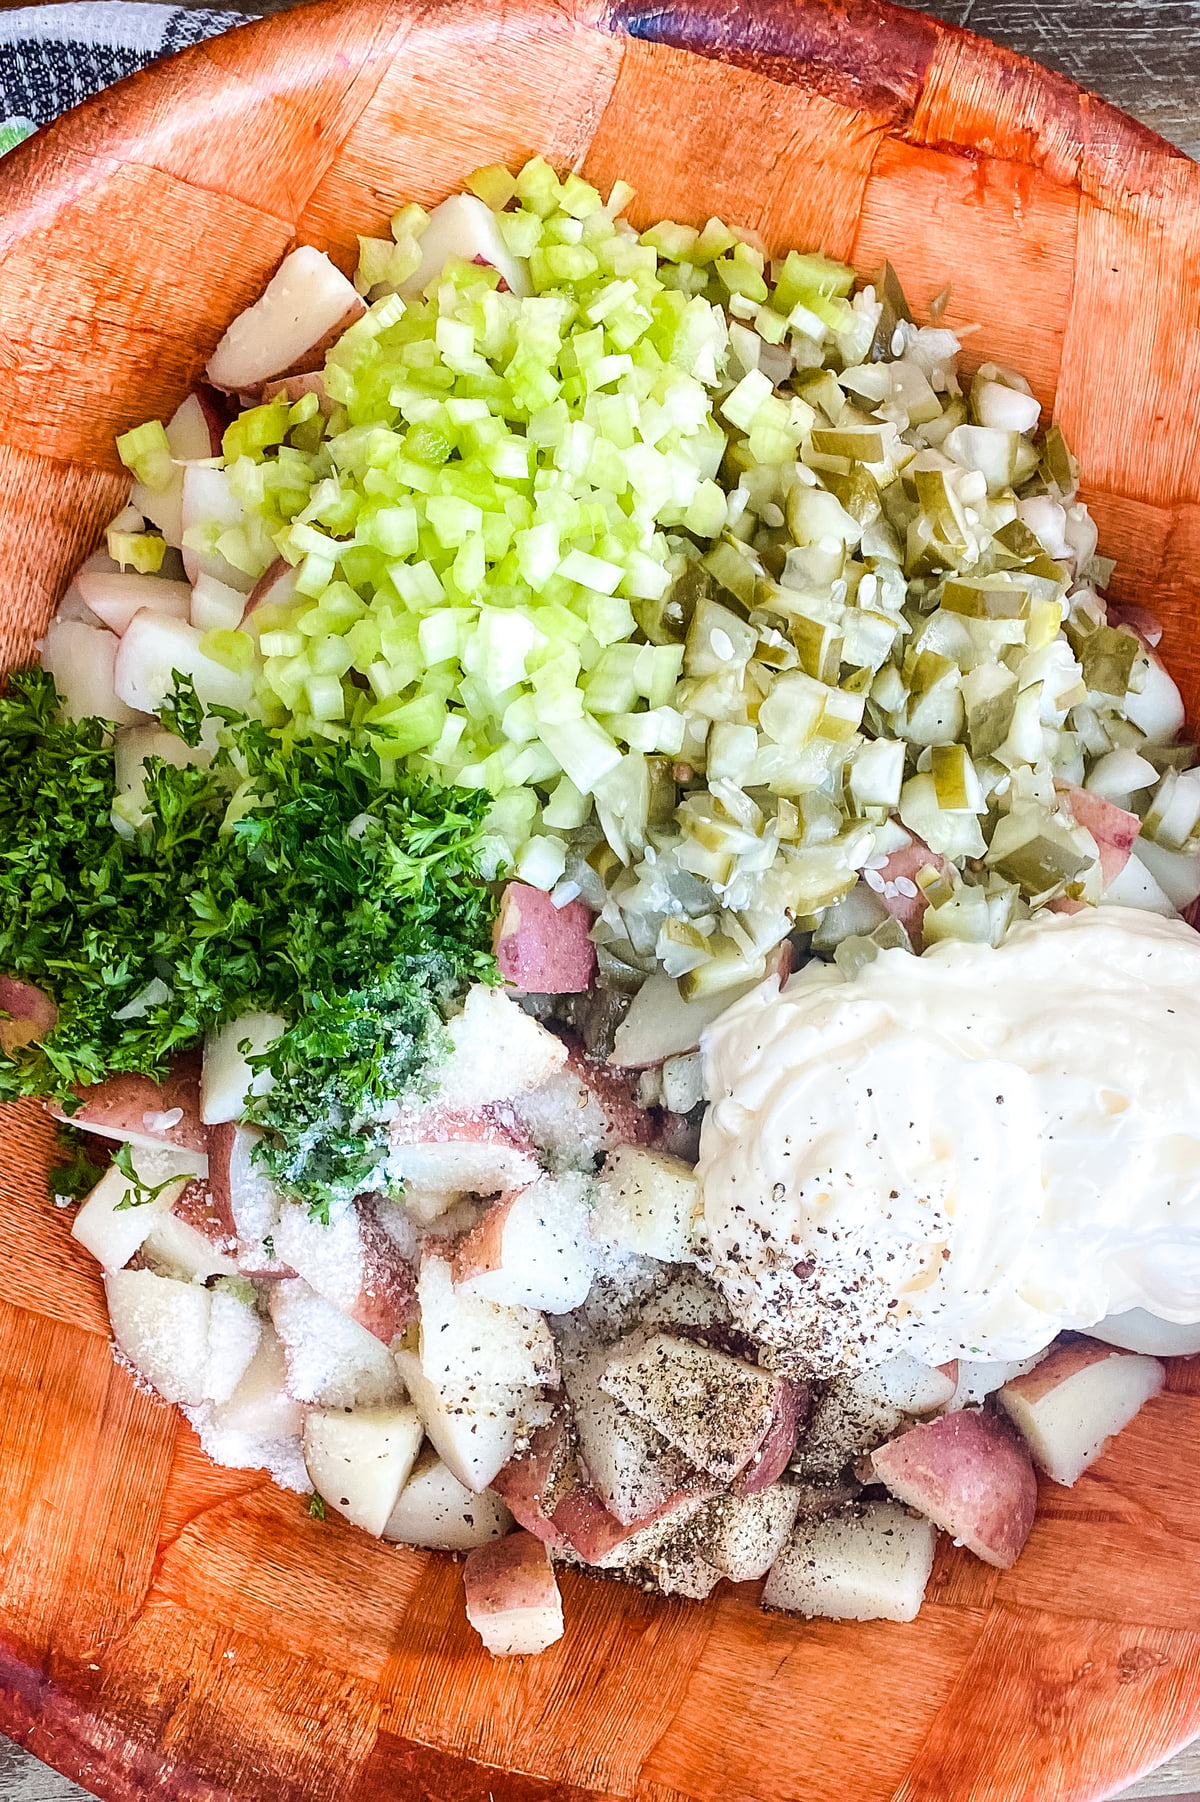 red potatoes, celery, mayonnaise, dill pickles, parsley, kosher salt and pepper